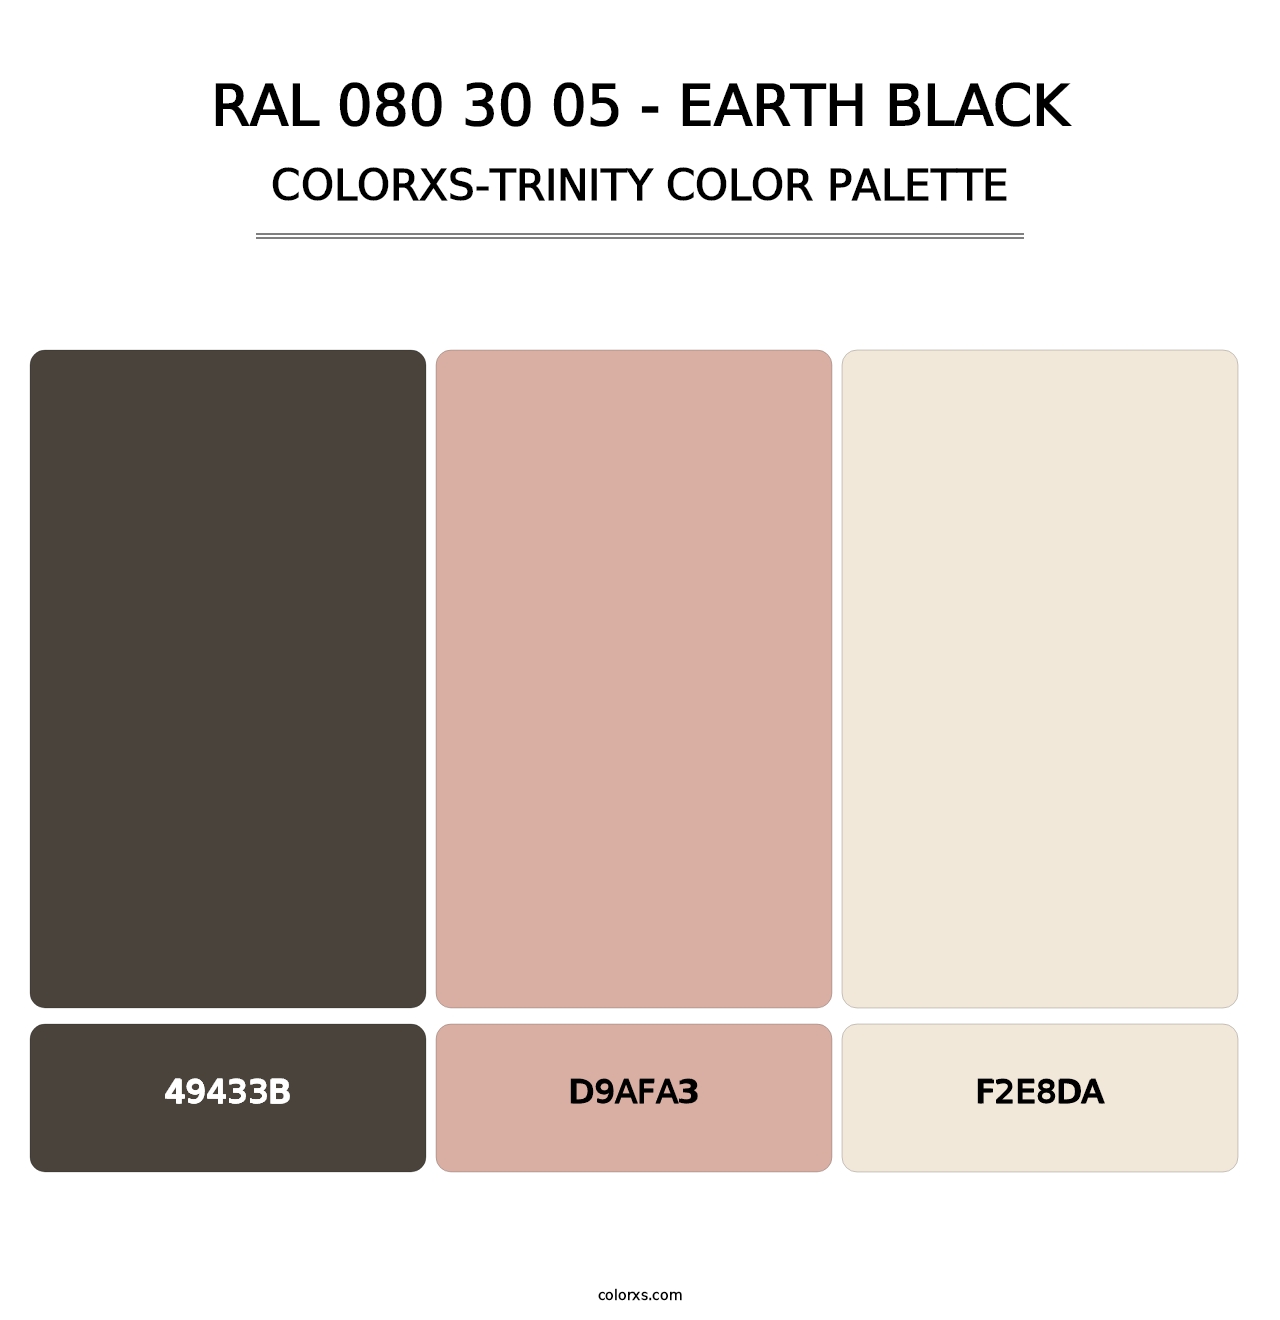 RAL 080 30 05 - Earth Black - Colorxs Trinity Palette